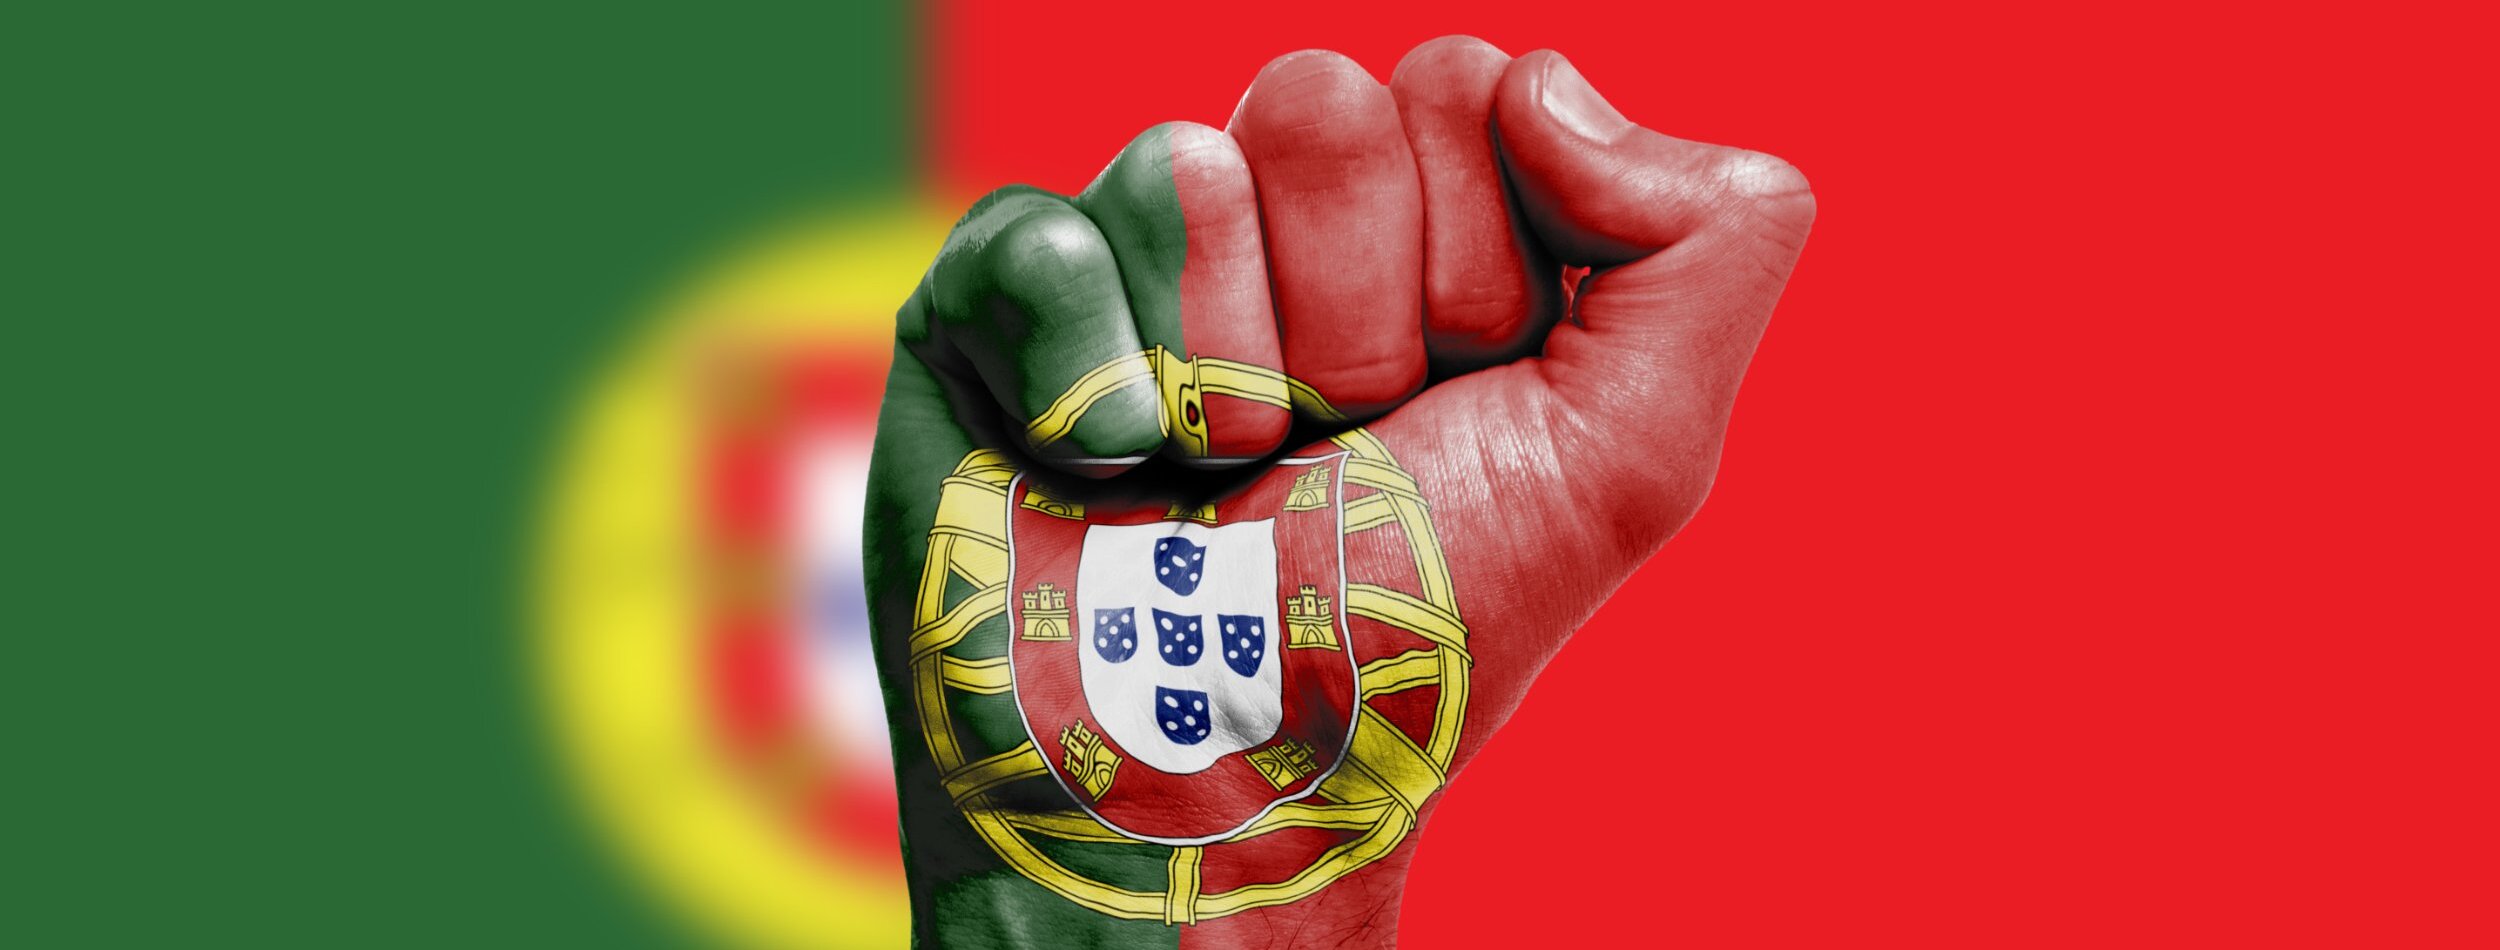 Portugal flag painted on a hand 